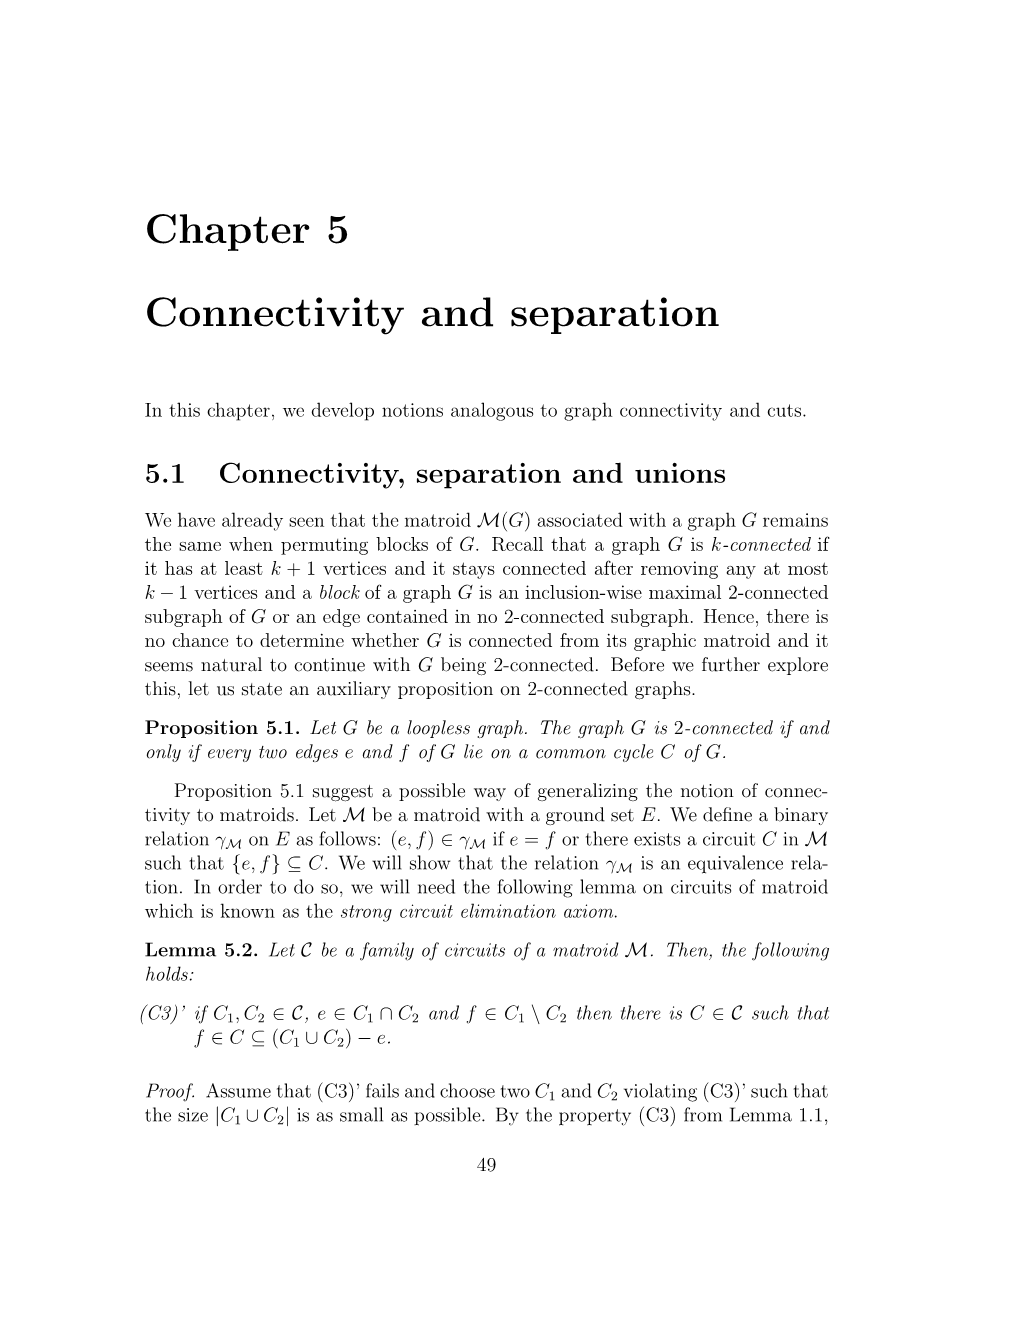 Chapter 5 Connectivity and Separation